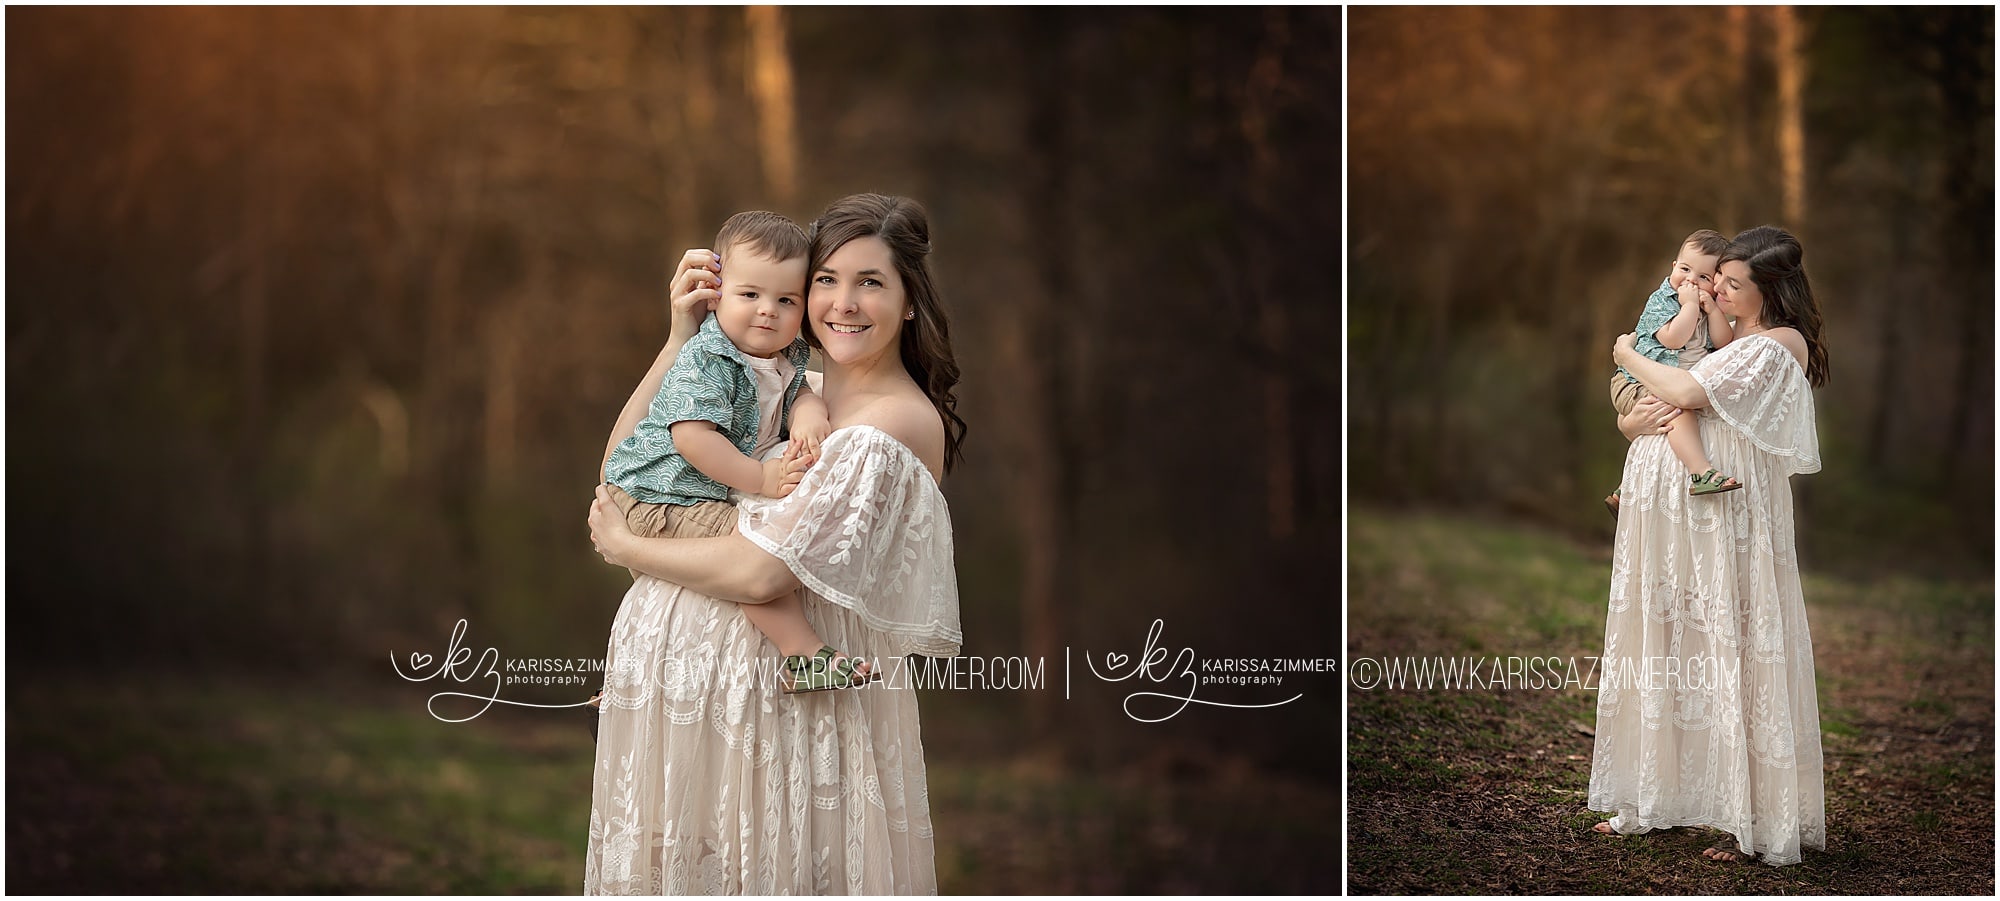 pregnant bother embraces her toddler son at her maternity and family photo session with karissa zimmer photography